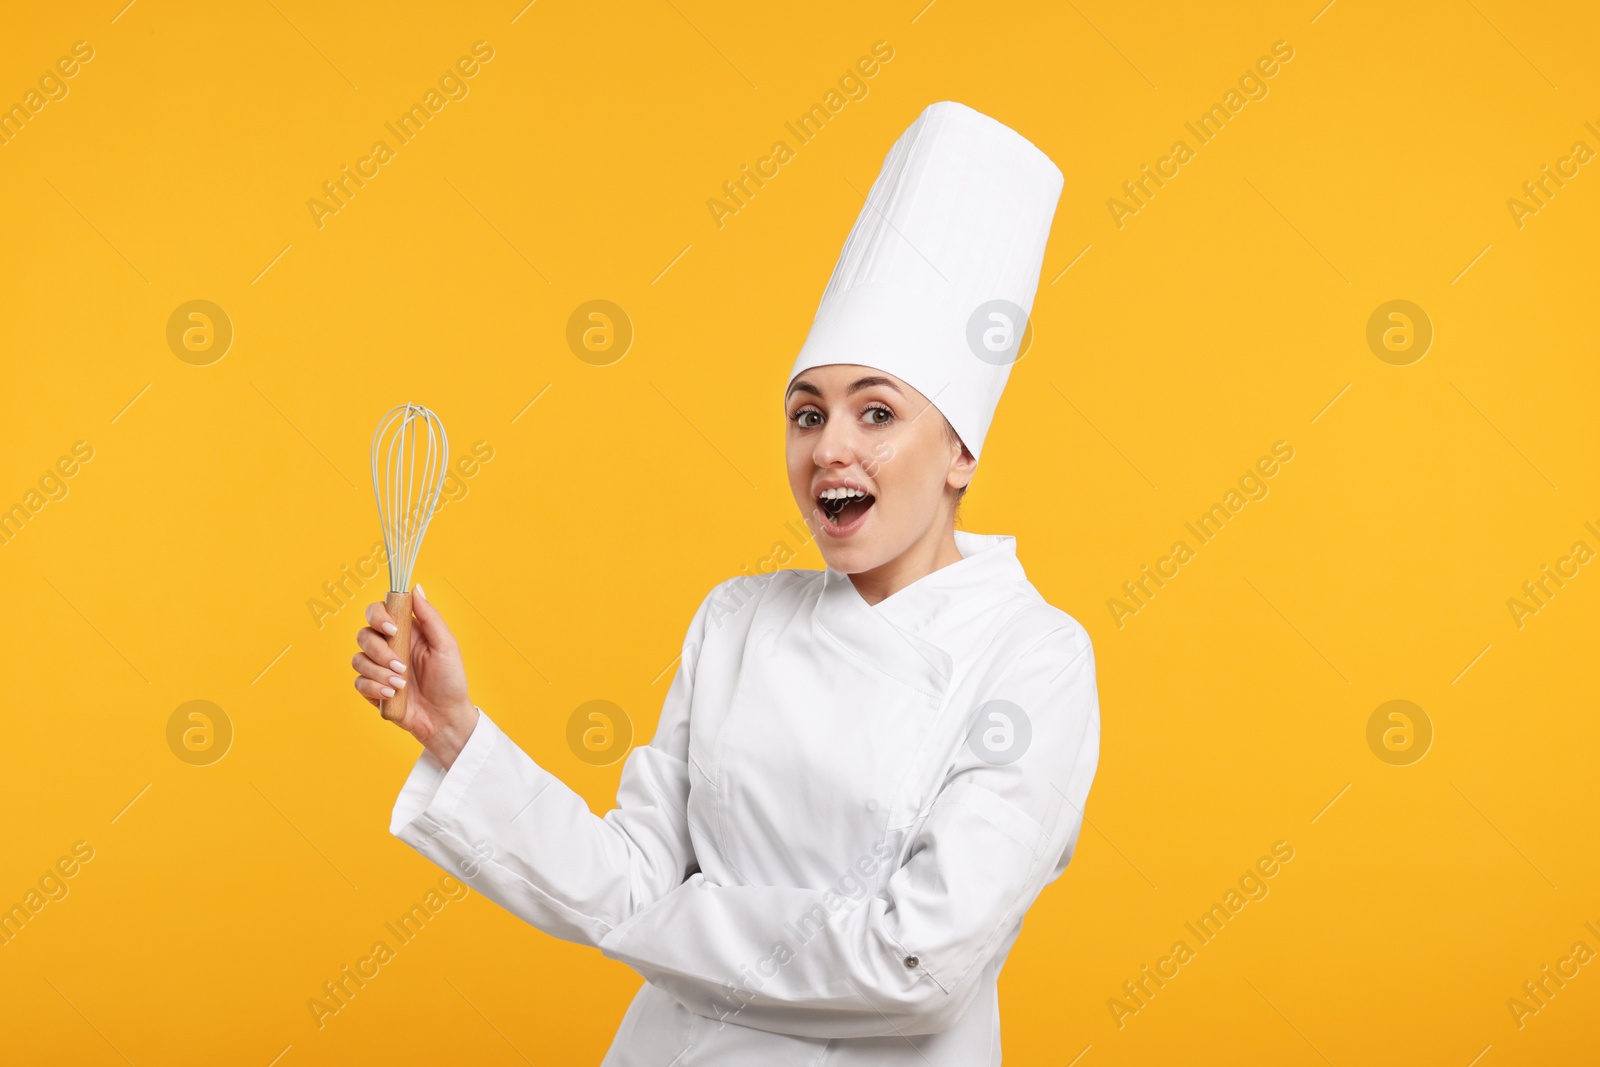 Photo of Surprised professional confectioner in uniform holding whisk on yellow background